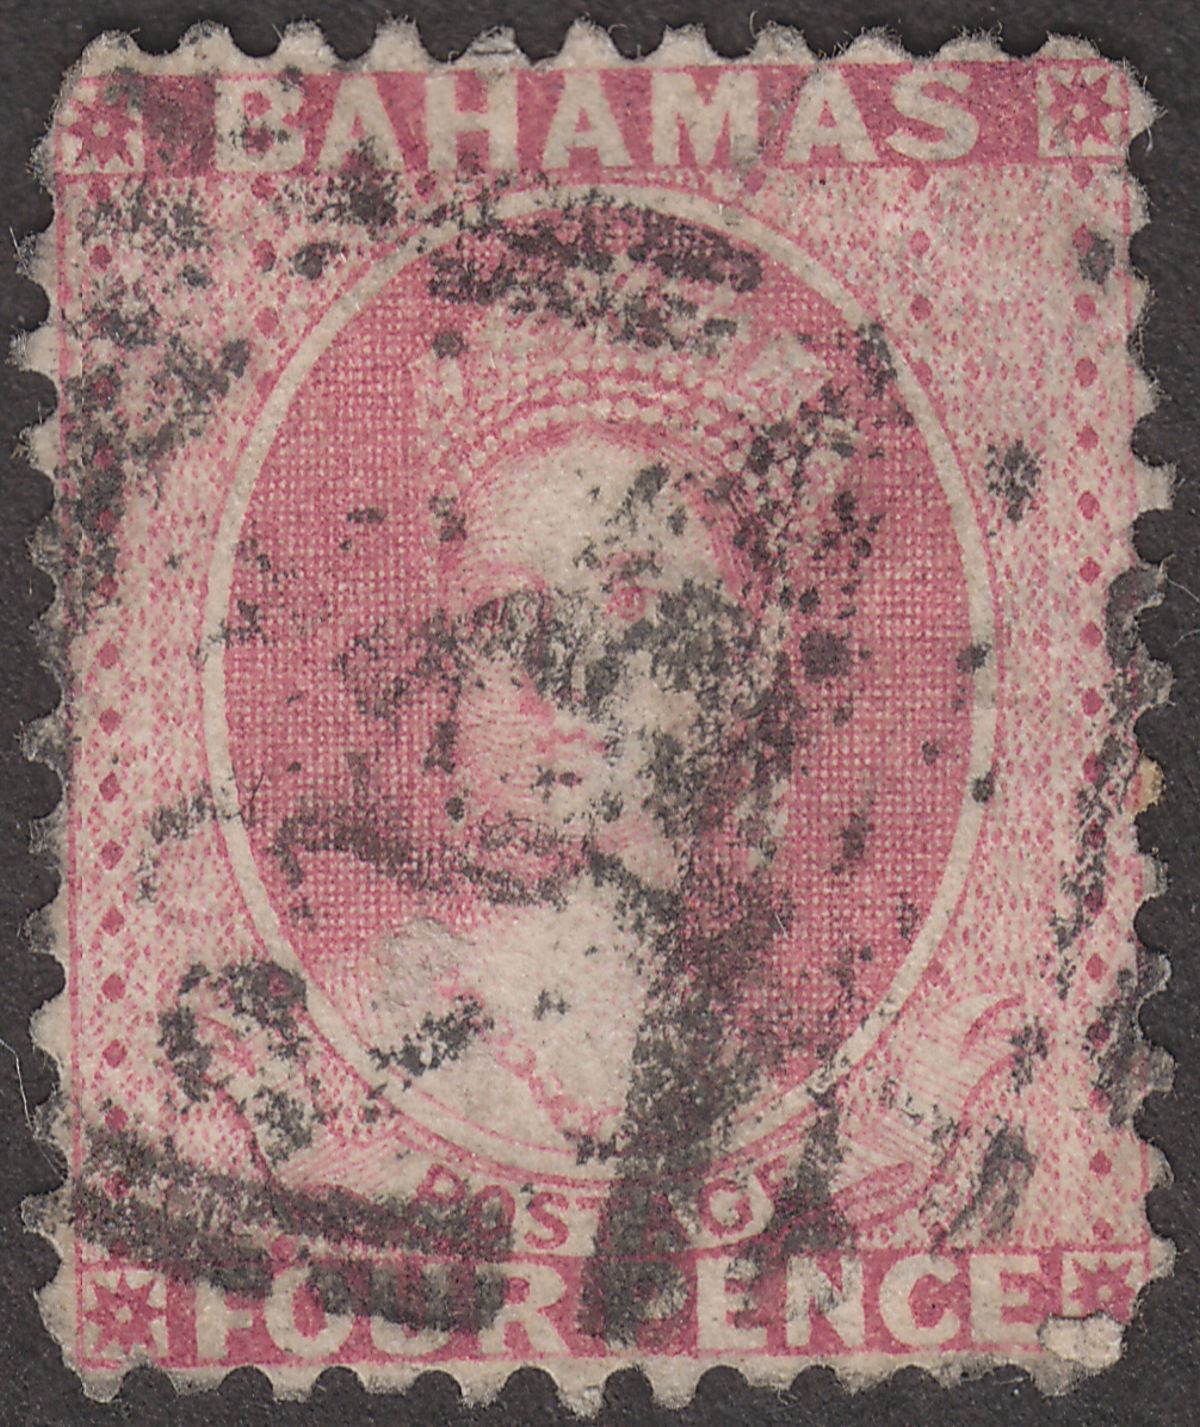 Bahamas 1882 QV Chalon 4d Rose perf 12 Used SG41 cat £45